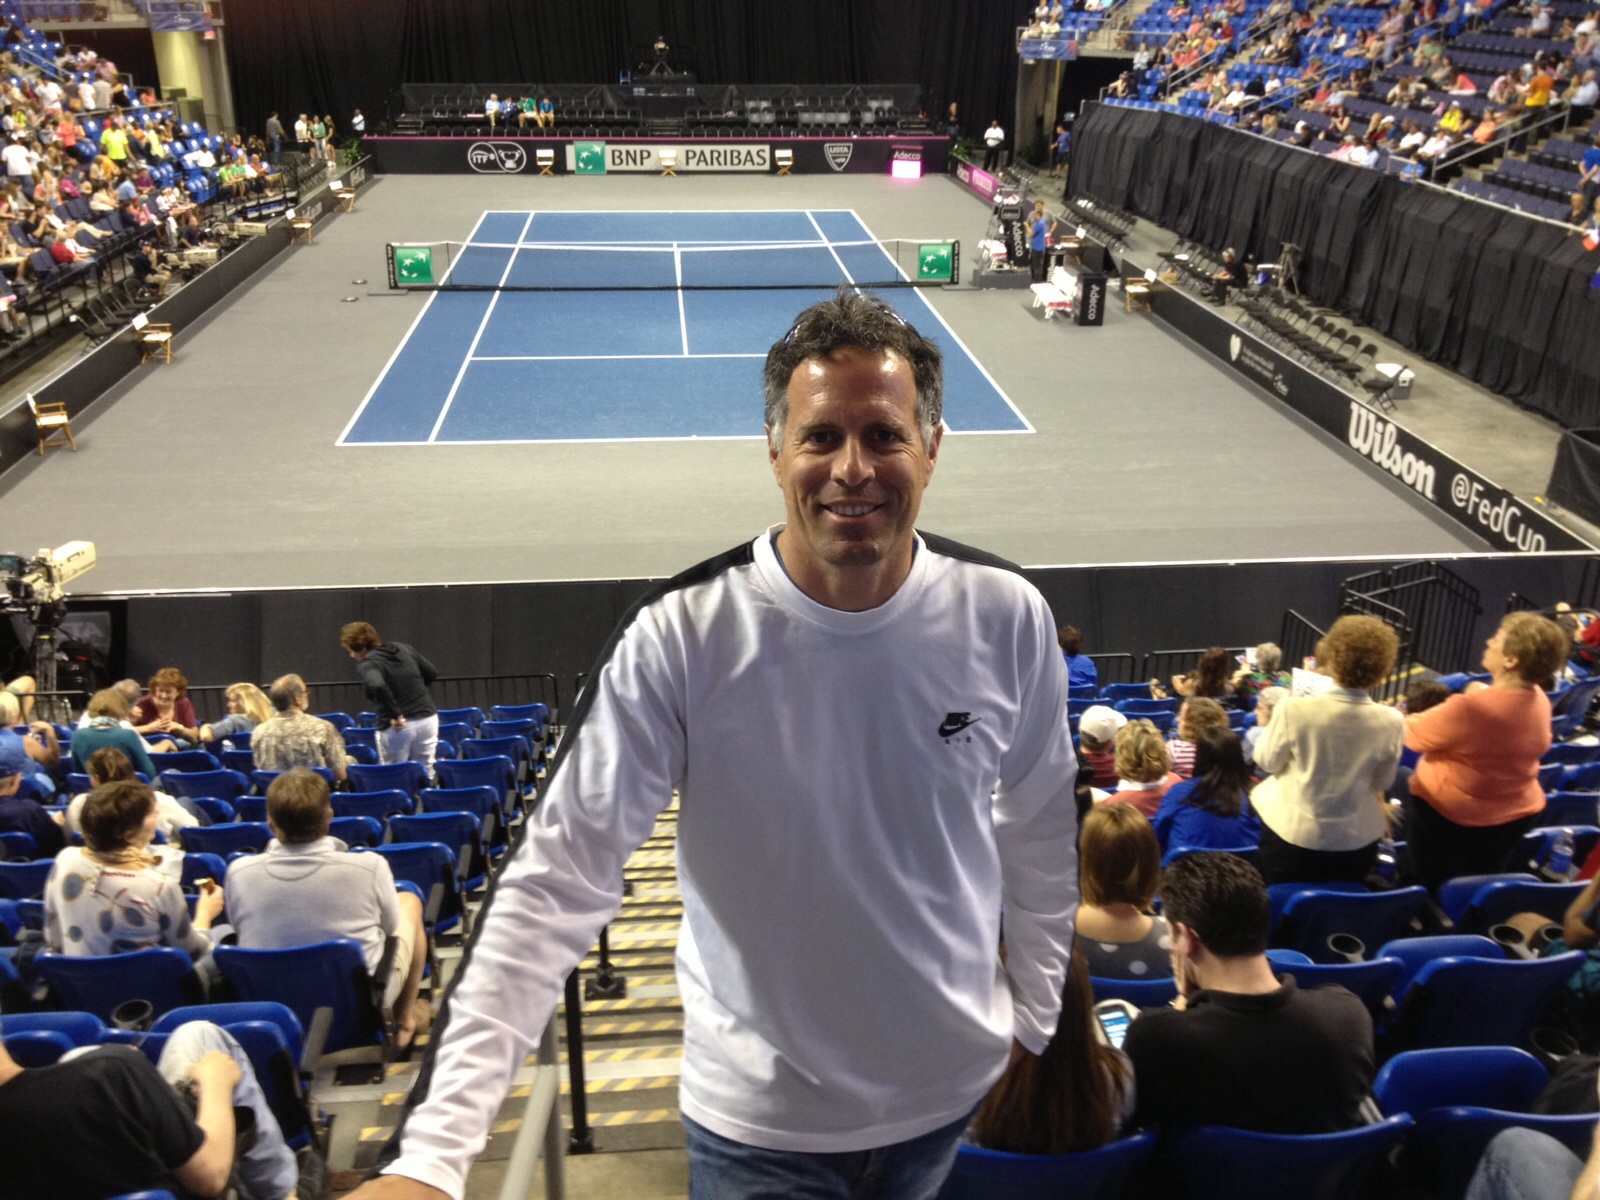 Ted B. teaches tennis lessons in Leawood, KS